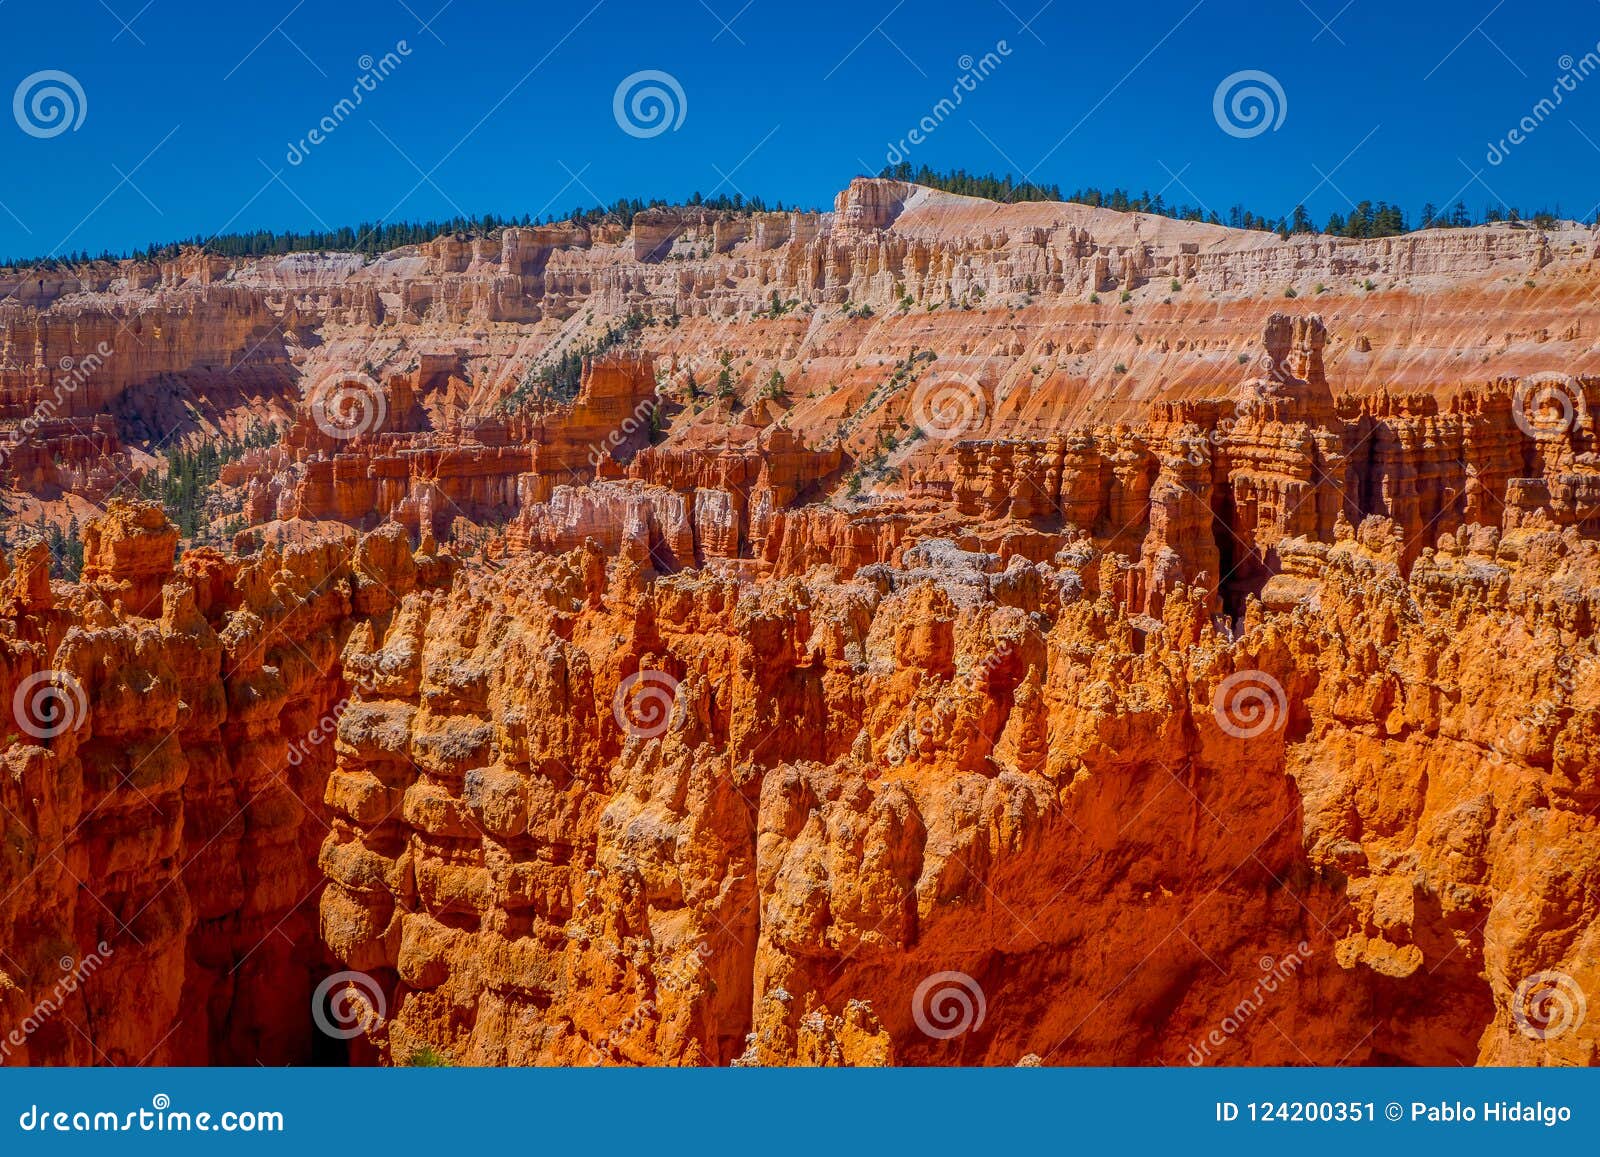 hoodoo landscape of bryce canyon national park